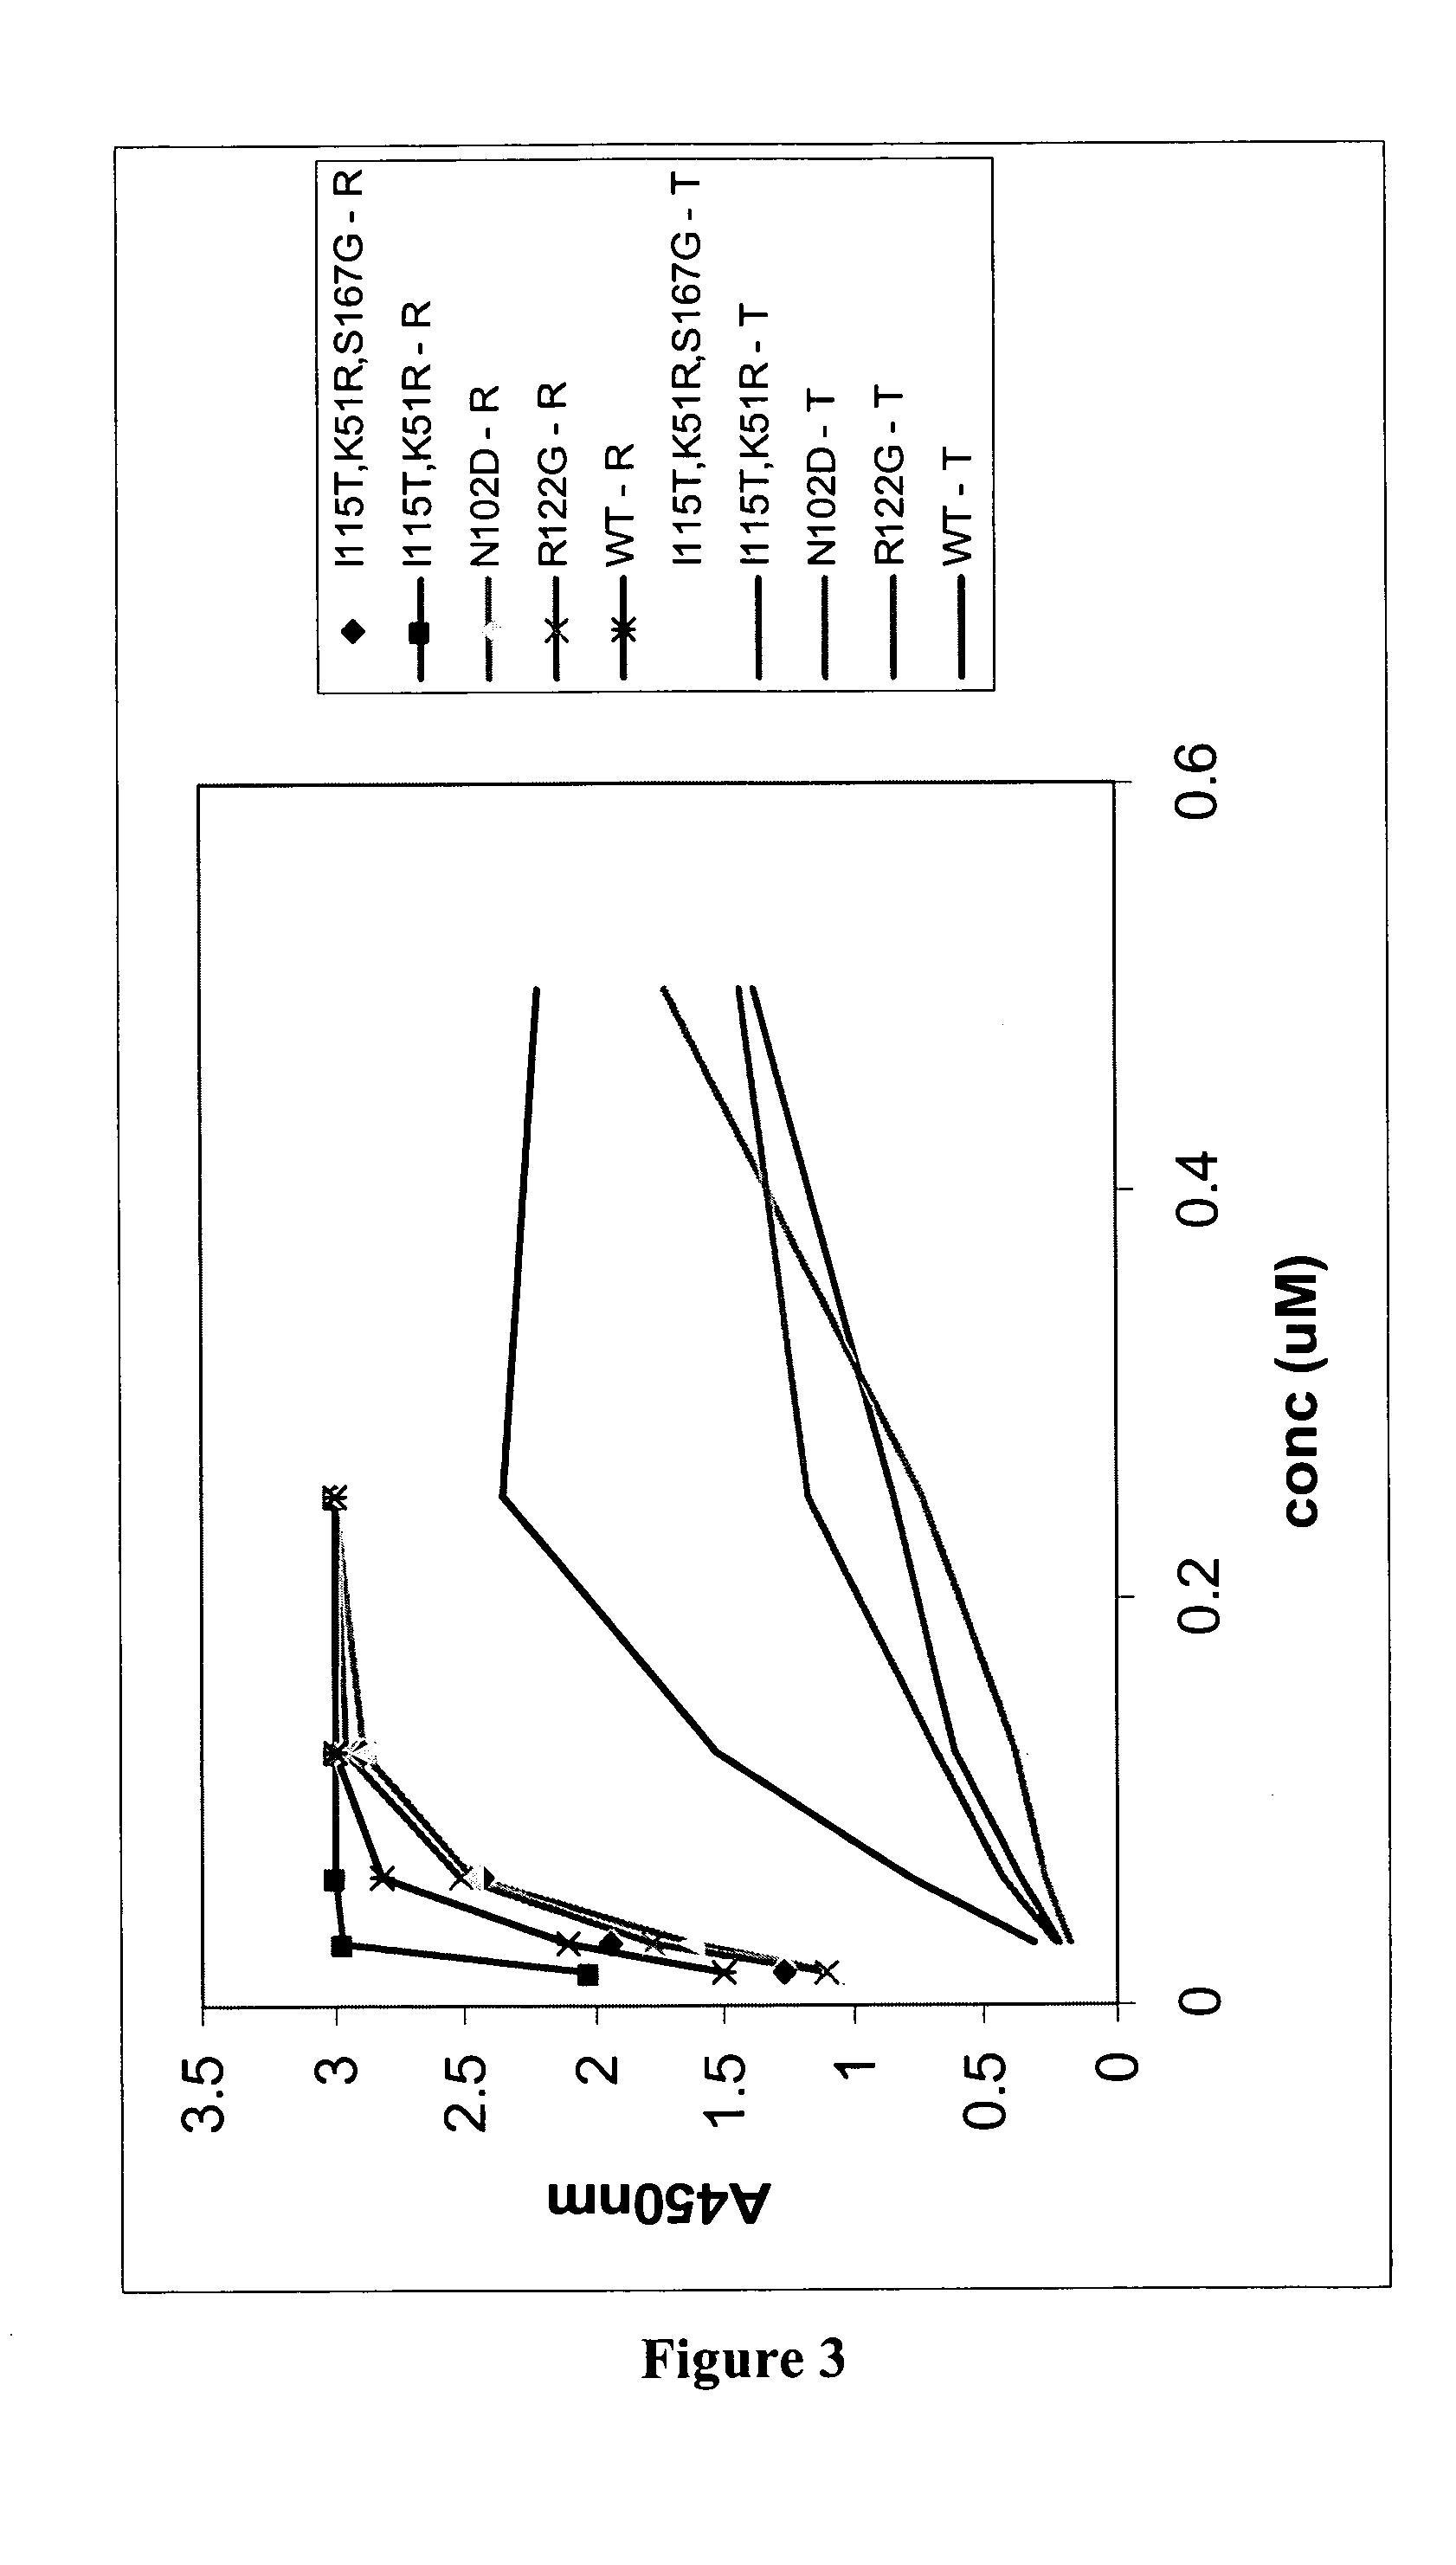 Osteoprotegerin variant proteins